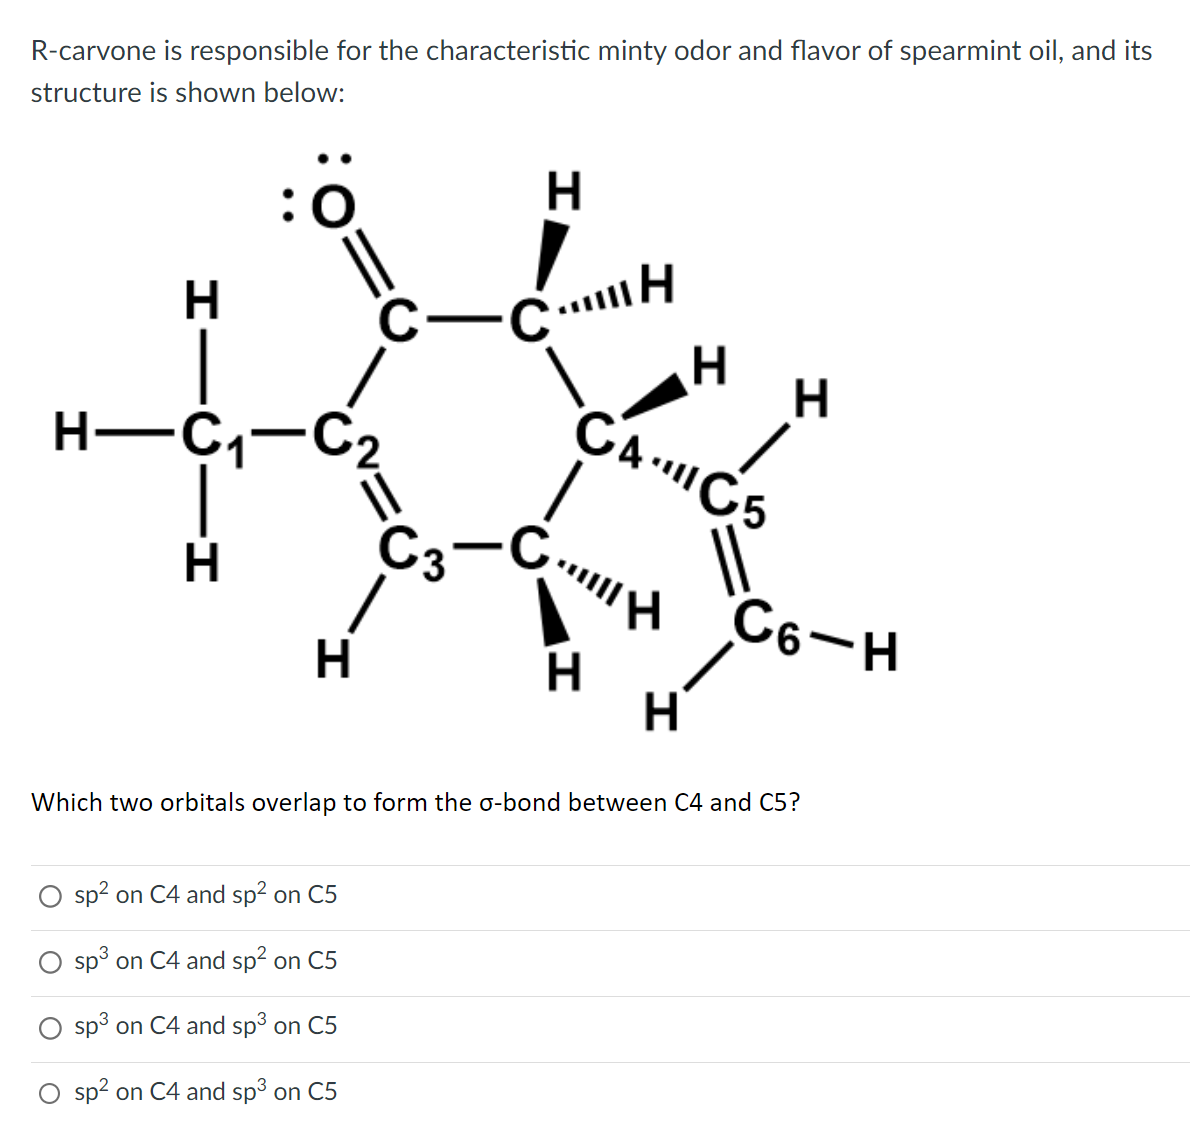 R-carvone is responsible for the characteristic minty odor and flavor of spearmint oil, and its
structure is shown below:
HIC
H-C₁-C₂
H
H
H
C-CH
sp² on C4 and sp² on C5
sp³ on C4 and sp² on C5
sp³ on C4 and sp³ on C5
sp² on C4 and sp³ on C5
H
CÁC5
C3-CH
H
H
H
C6-H
Which two orbitals overlap to form the o-bond between C4 and C5?